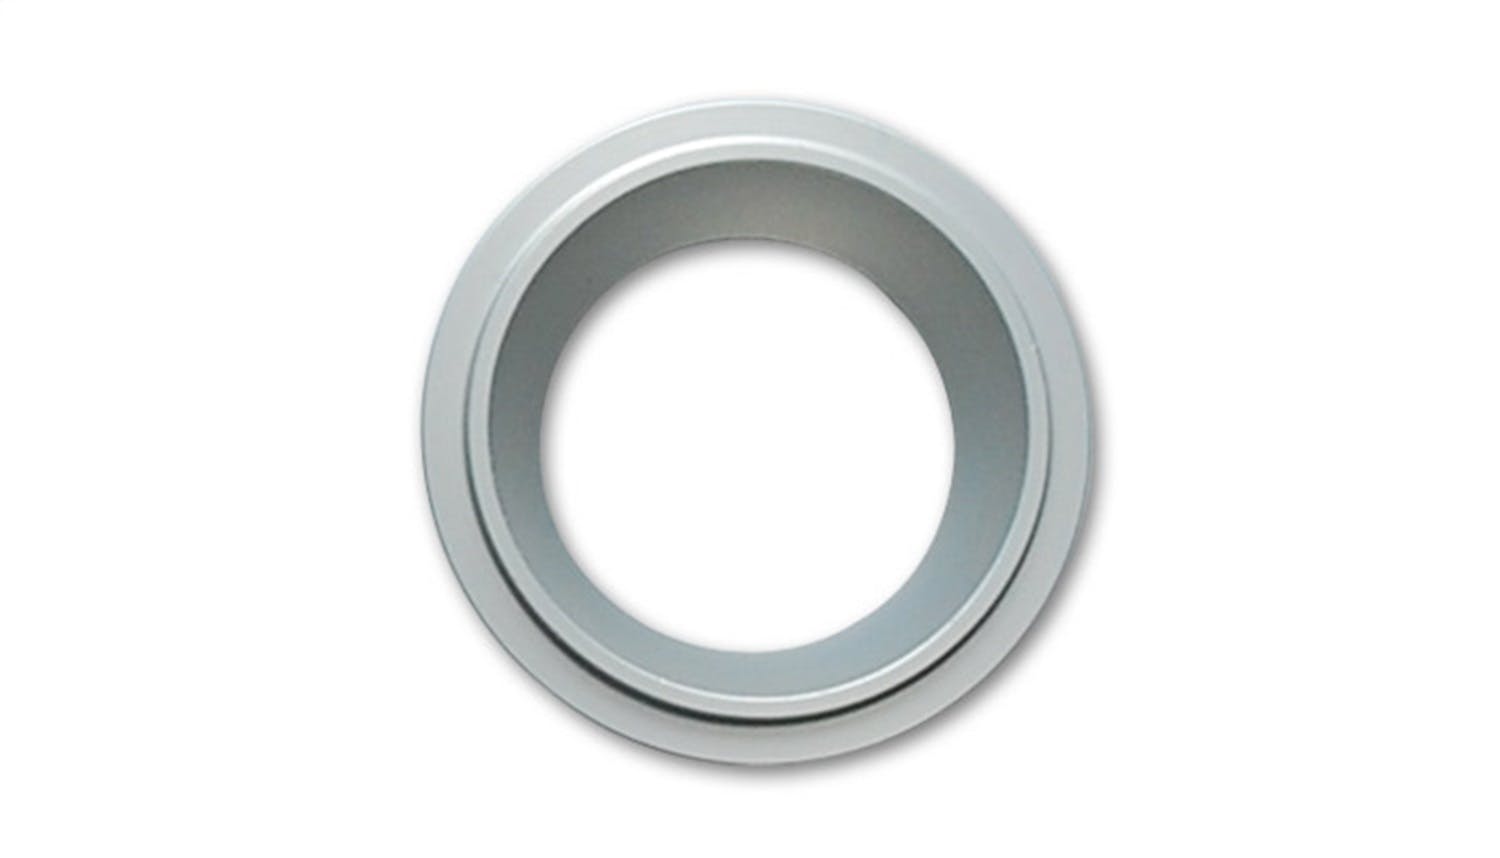 Vibrant Performance 10134 Aluminum Thread On Replacement Flange